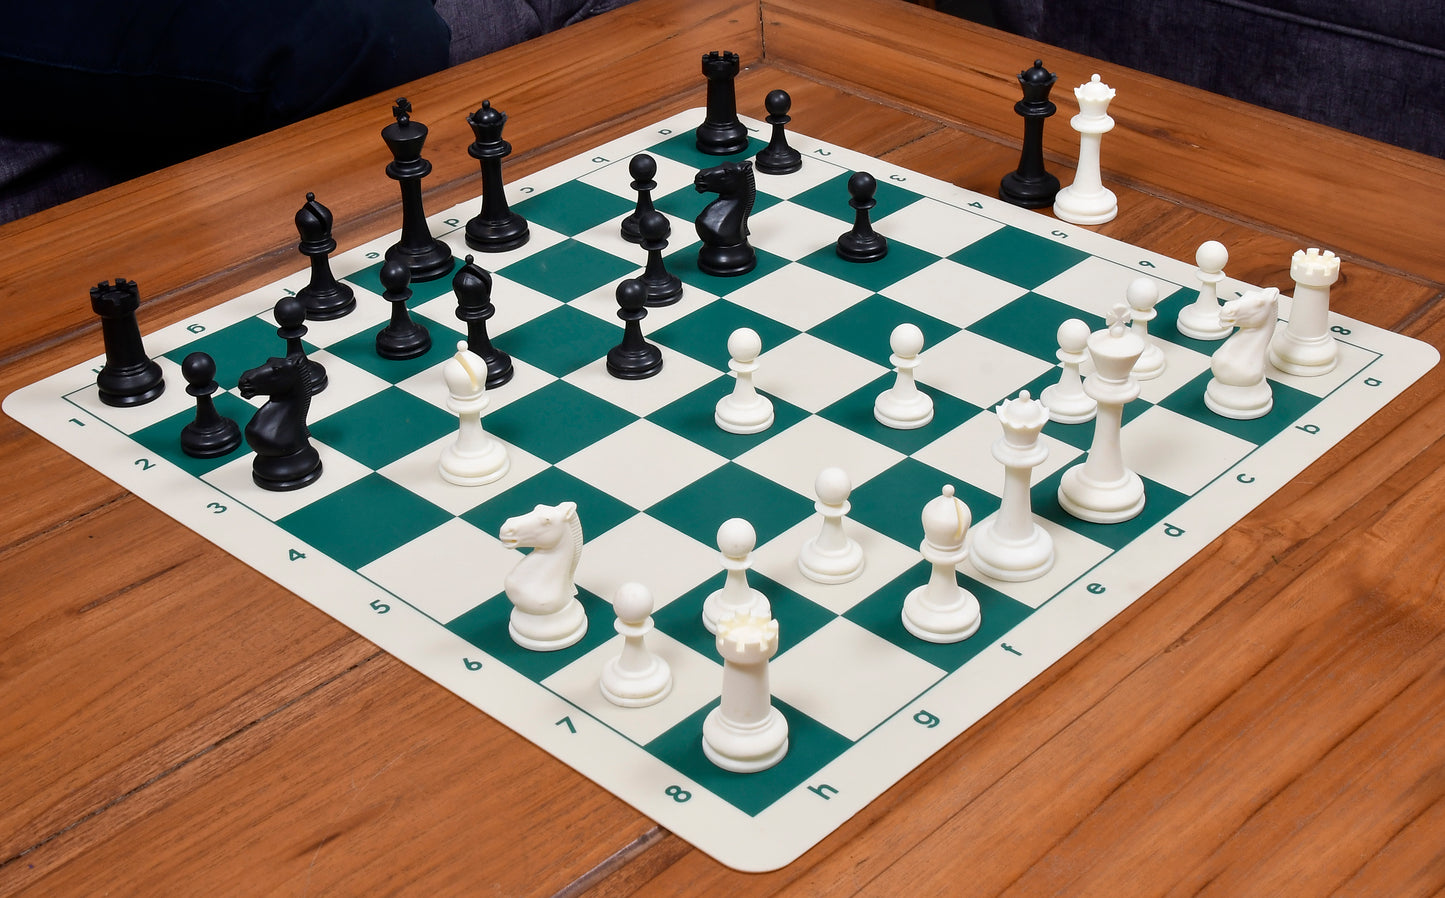 The International Series Unweighted Tournament Plastic Chess Pieces (34 Pieces) with Extra Queens - 3.8" King